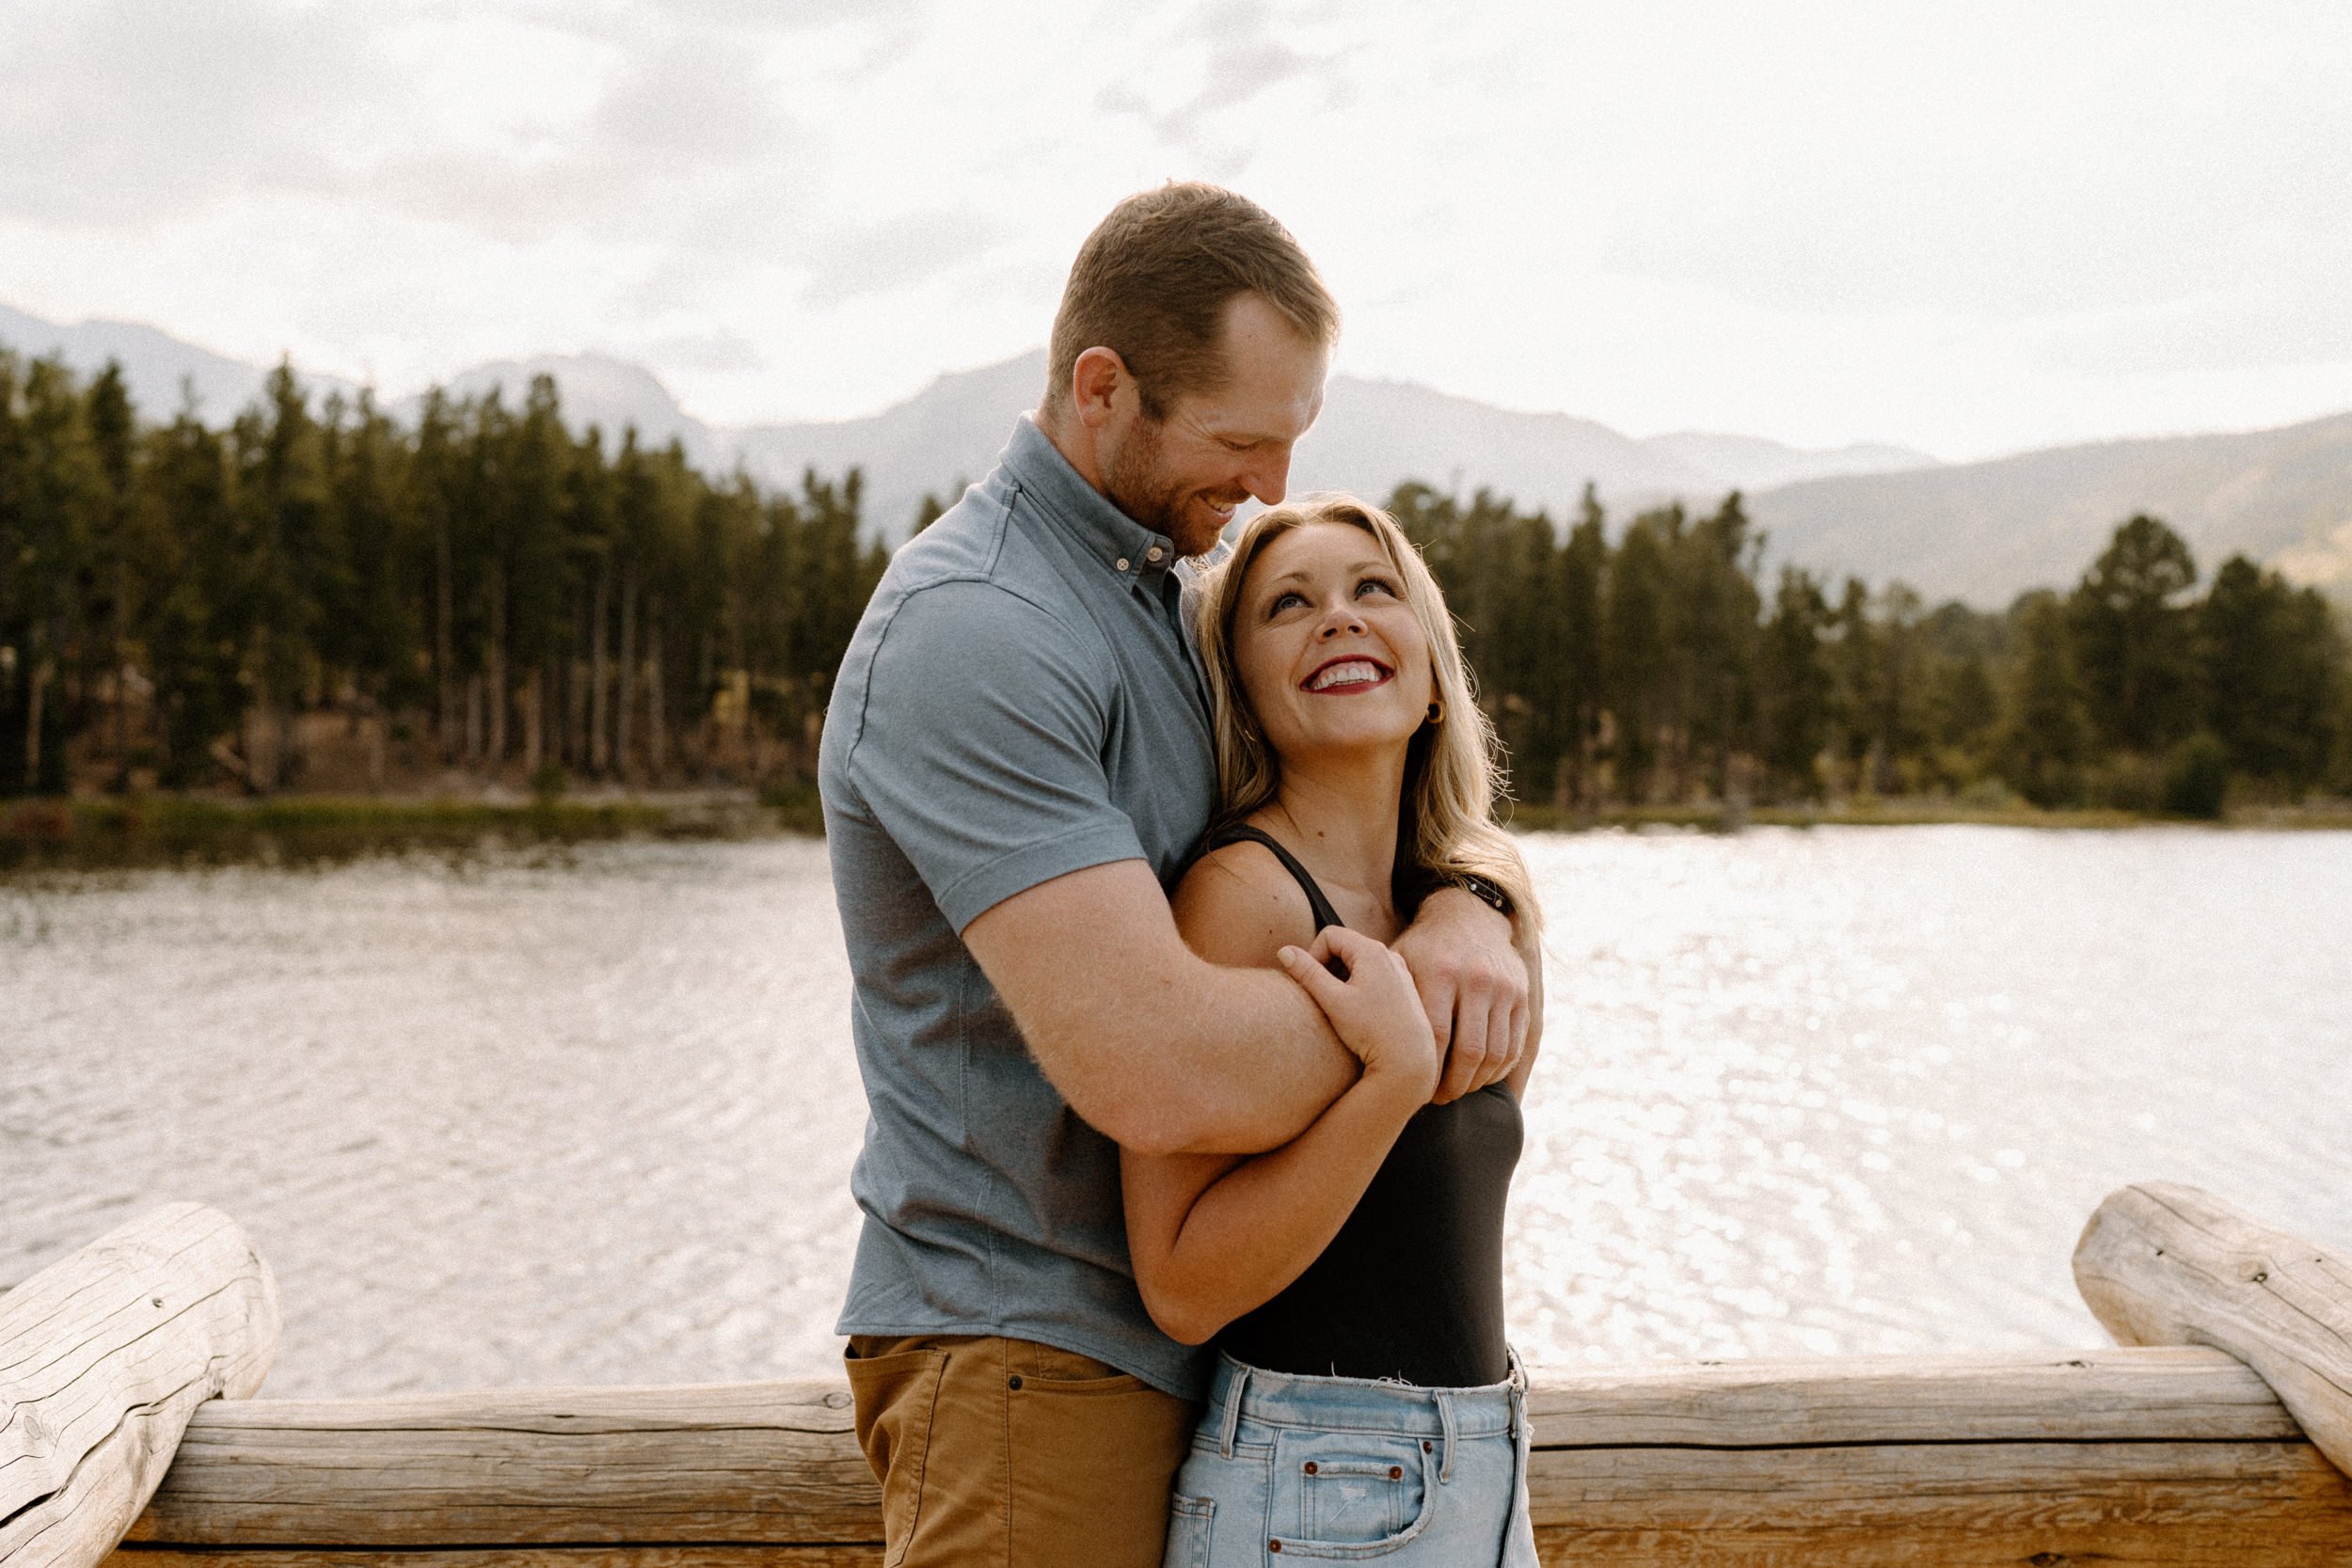 Woman smiles up to man as he hugs her from behind